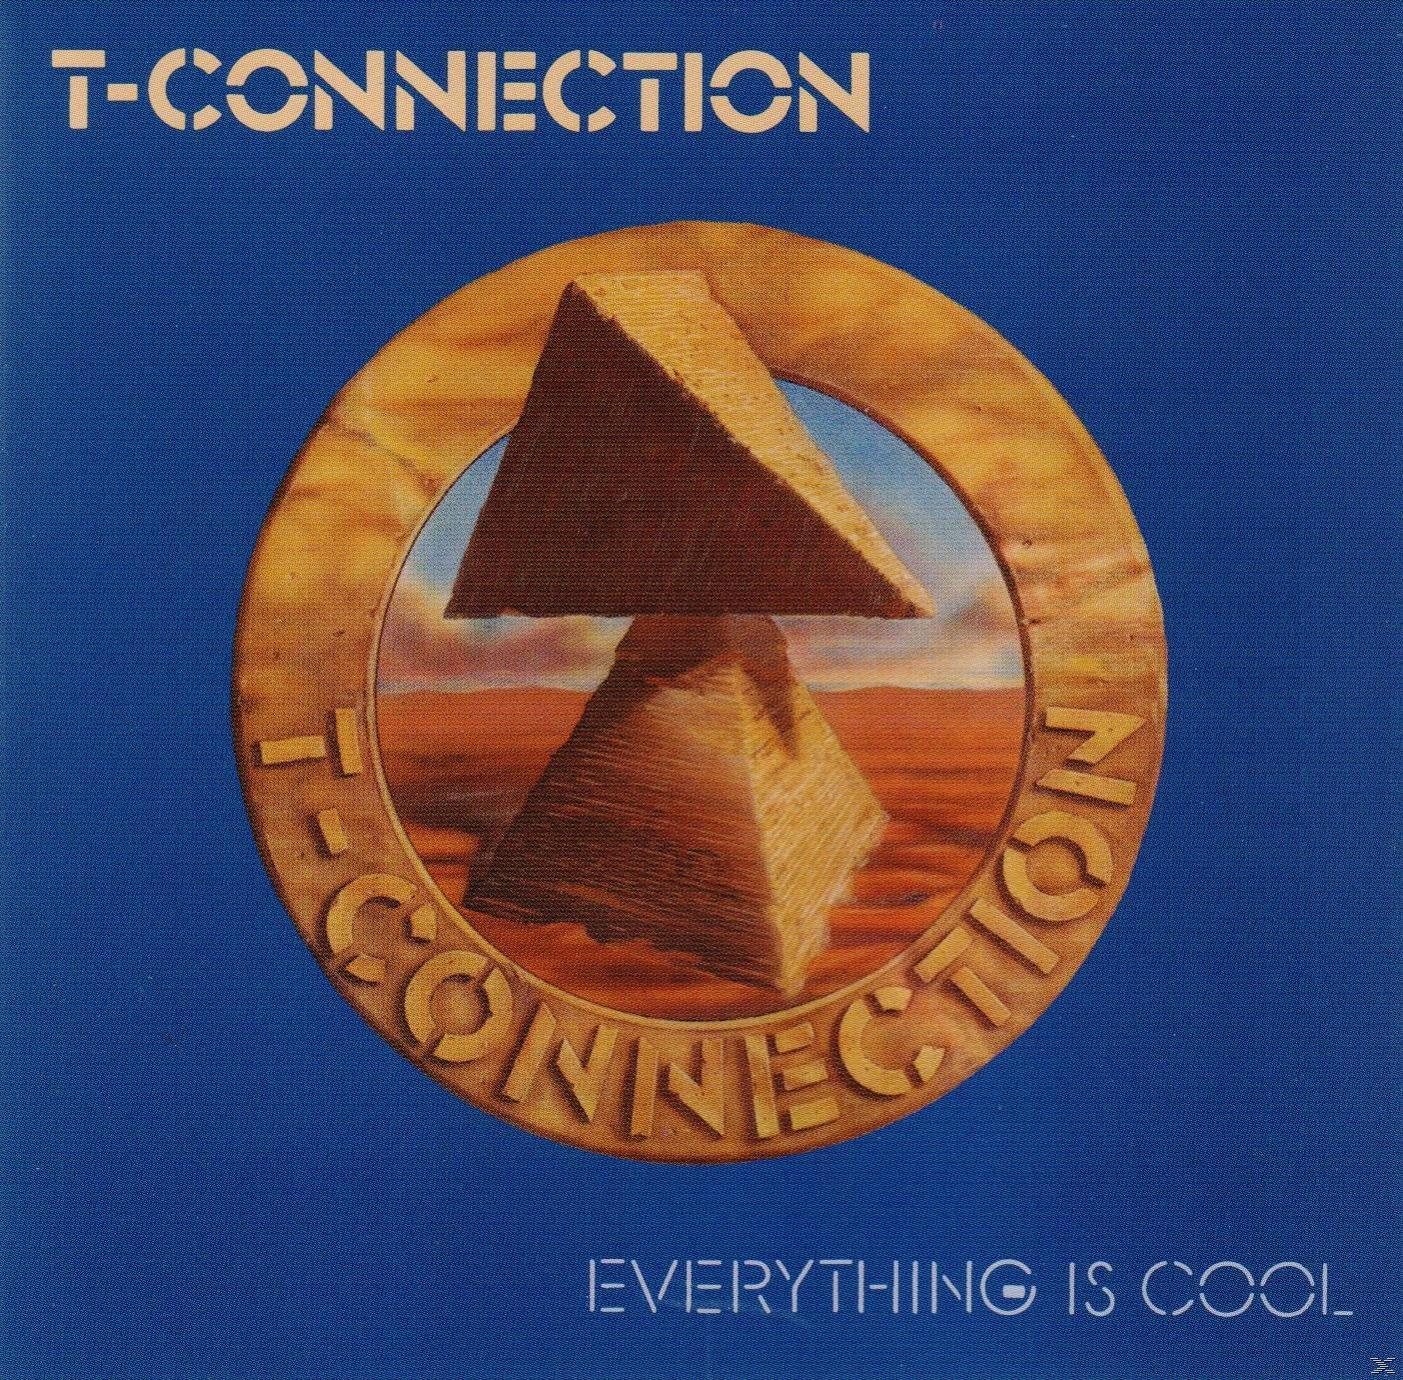 T. Connection - Everything cool - (CD) is